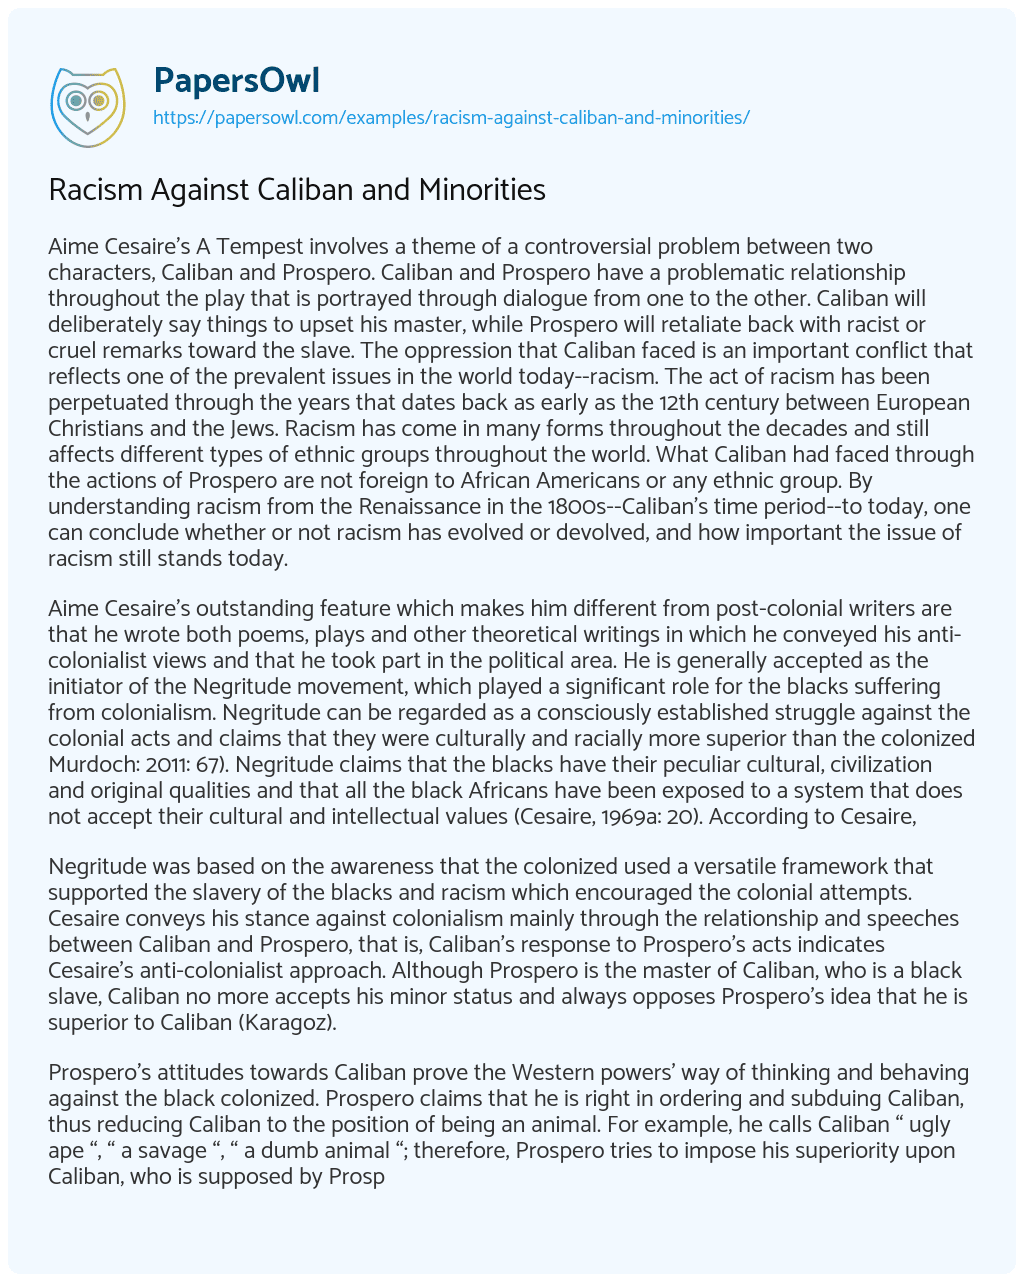 Essay on Racism against Caliban and Minorities